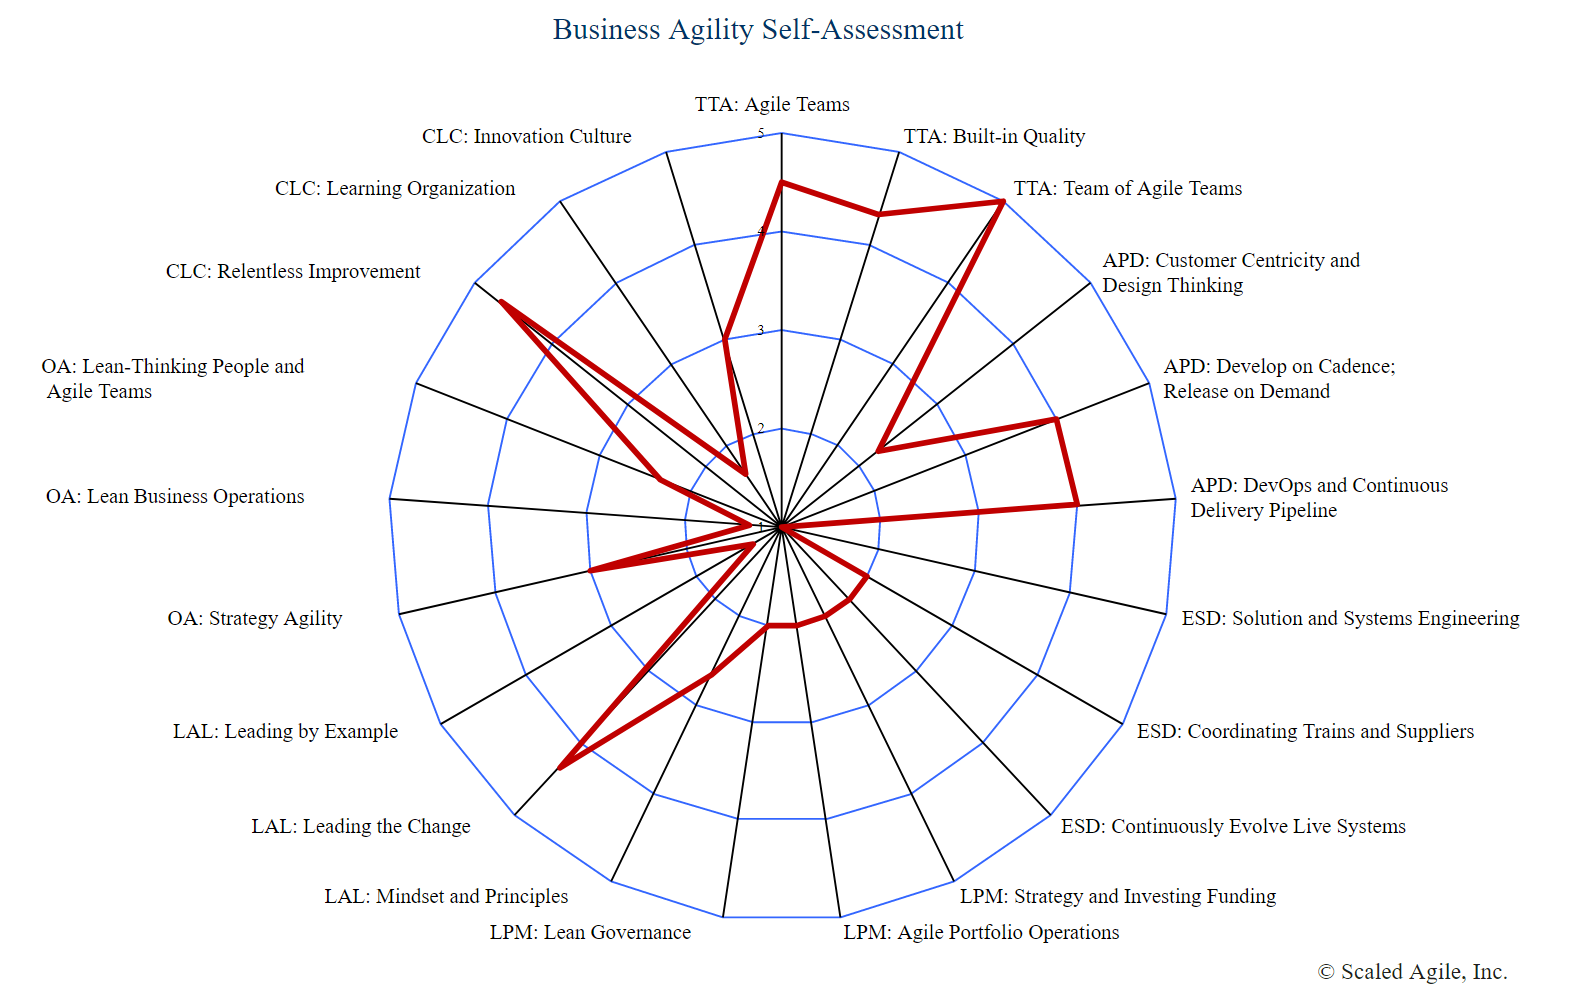 Business Agility Self-Assessment